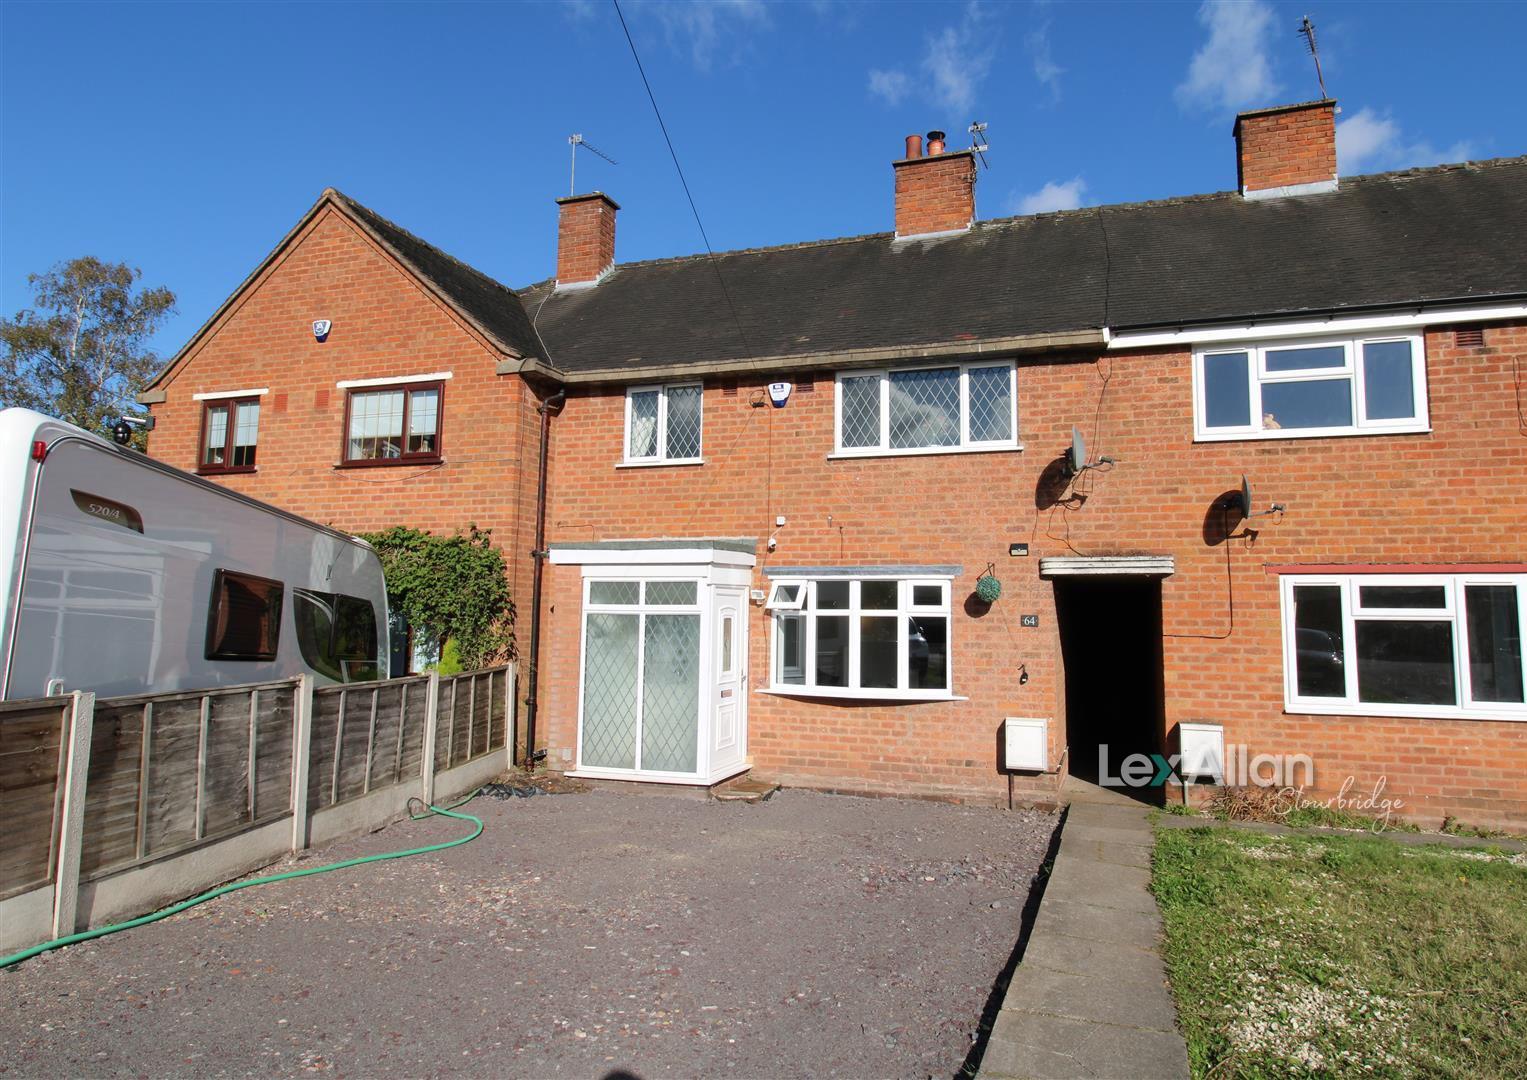 3 bed terraced house for sale in Shenstone Avenue, Stourbridge - Property Image 1